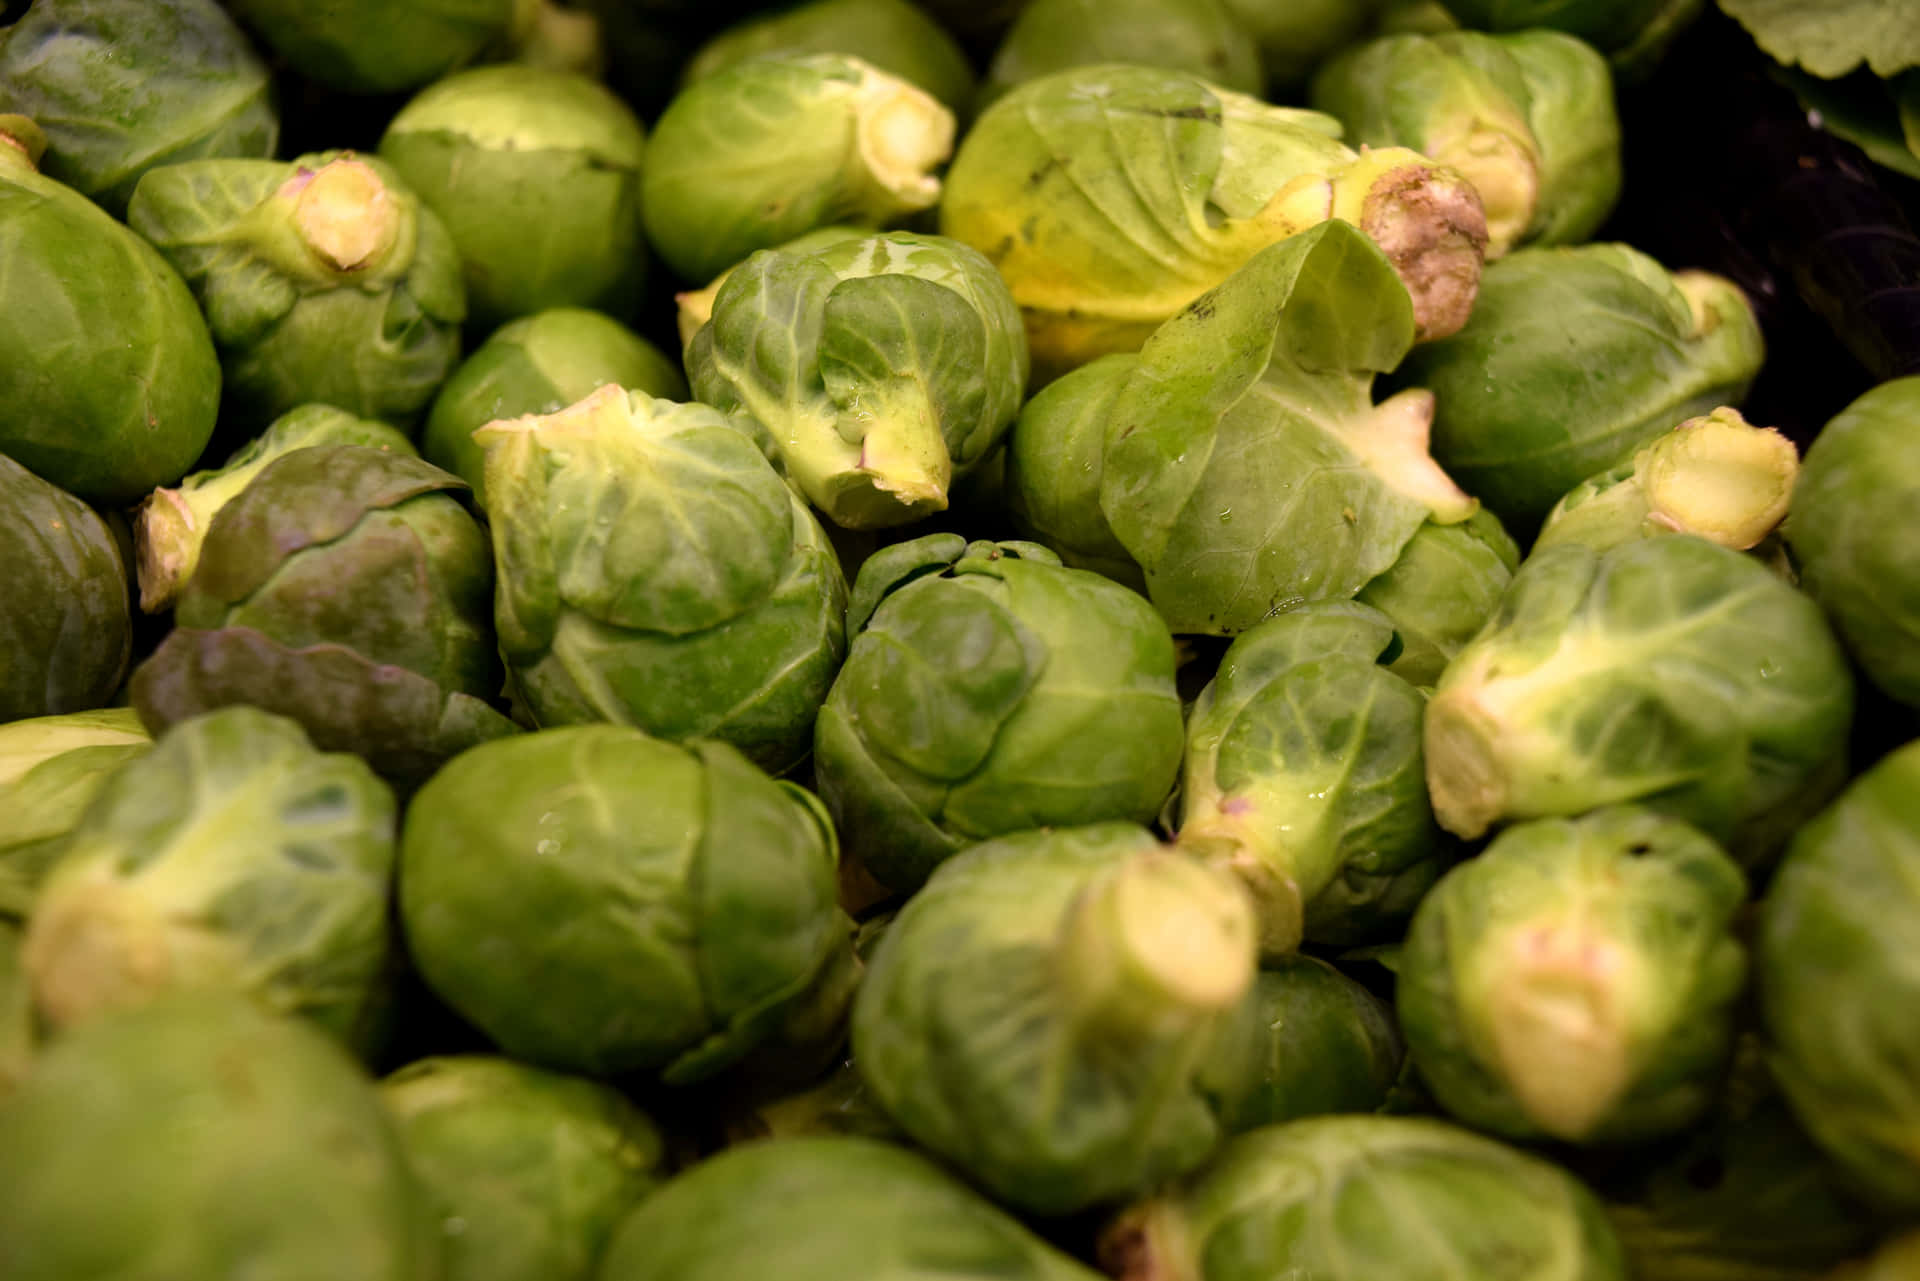 Brussels Sprouts Are Piled Up In A Pile